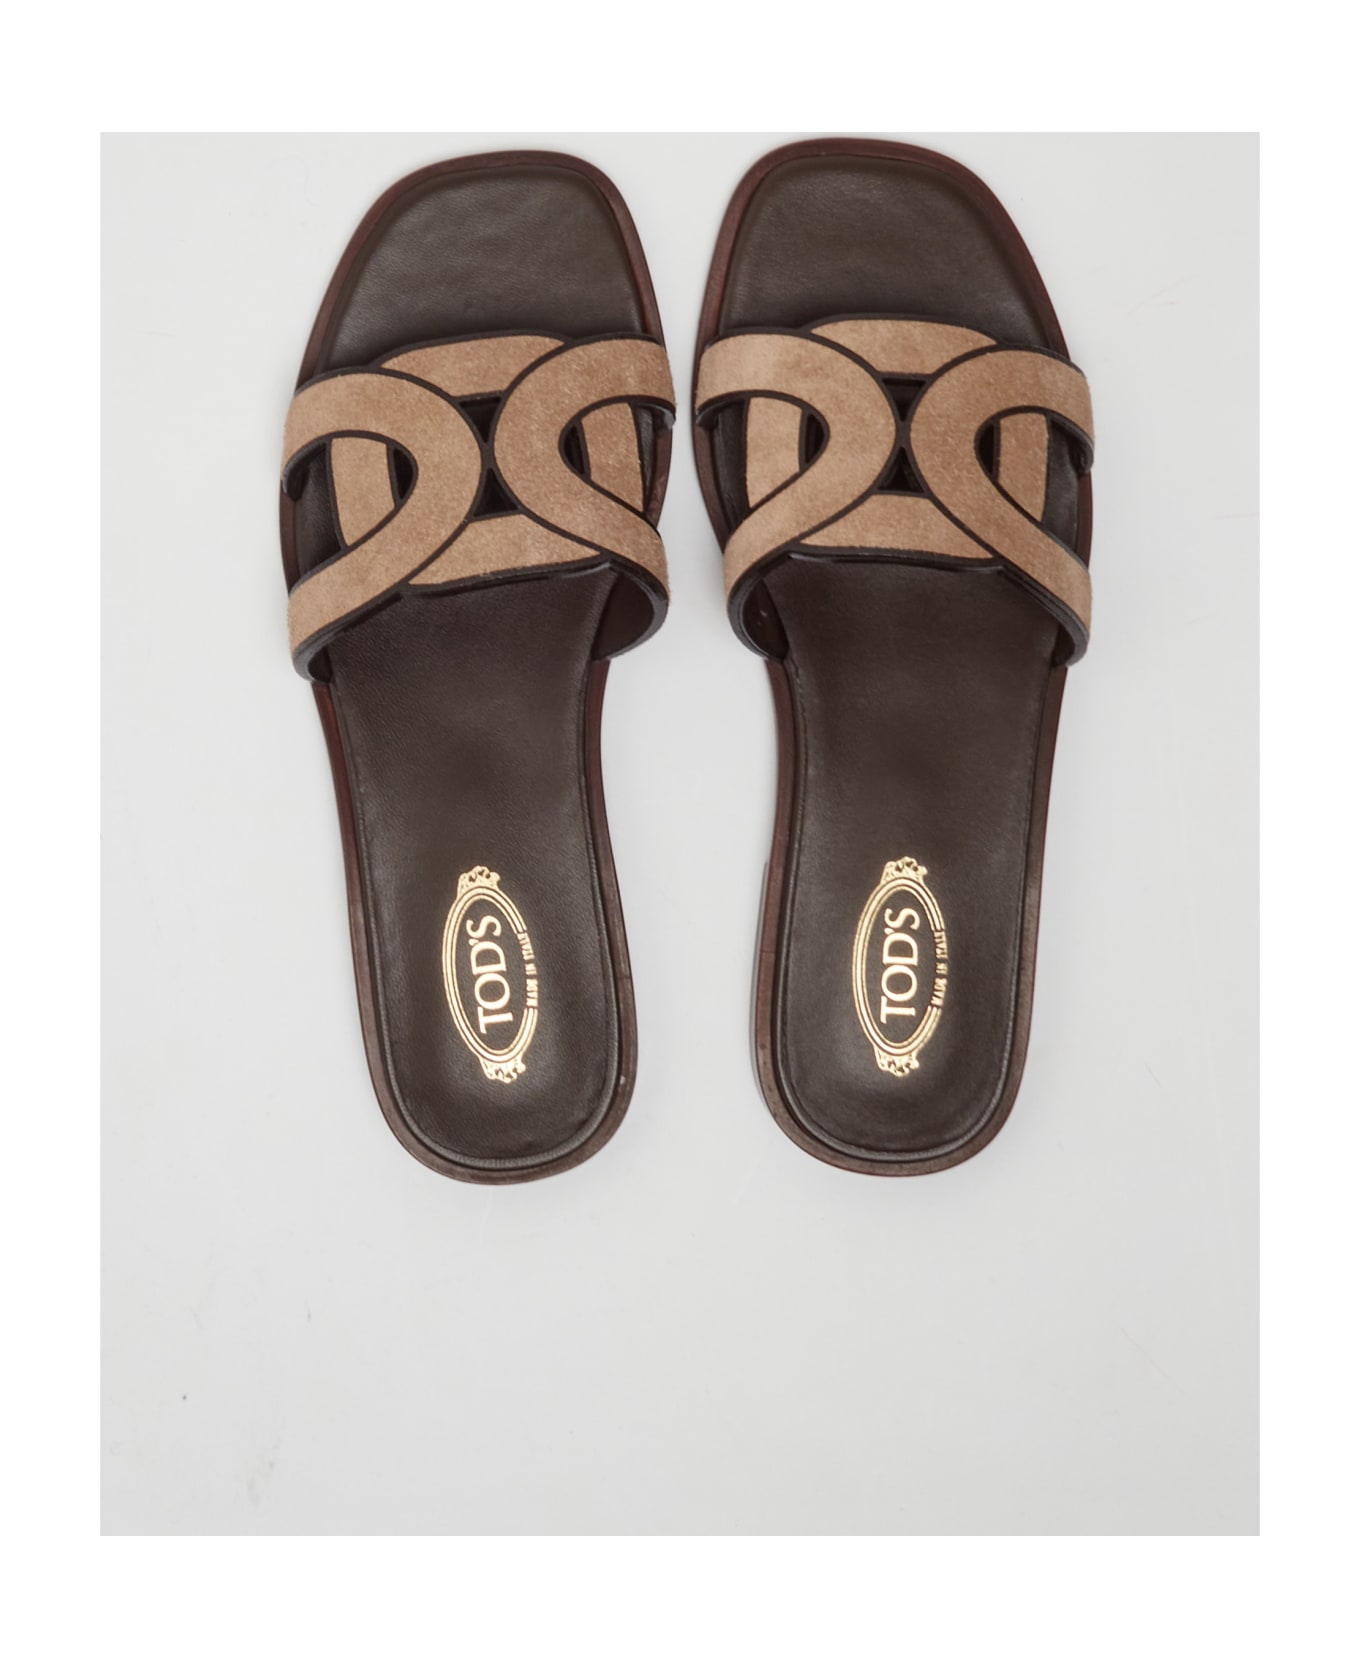 Tod's Biscuit Suede Slippers - MARRONE CHIARO